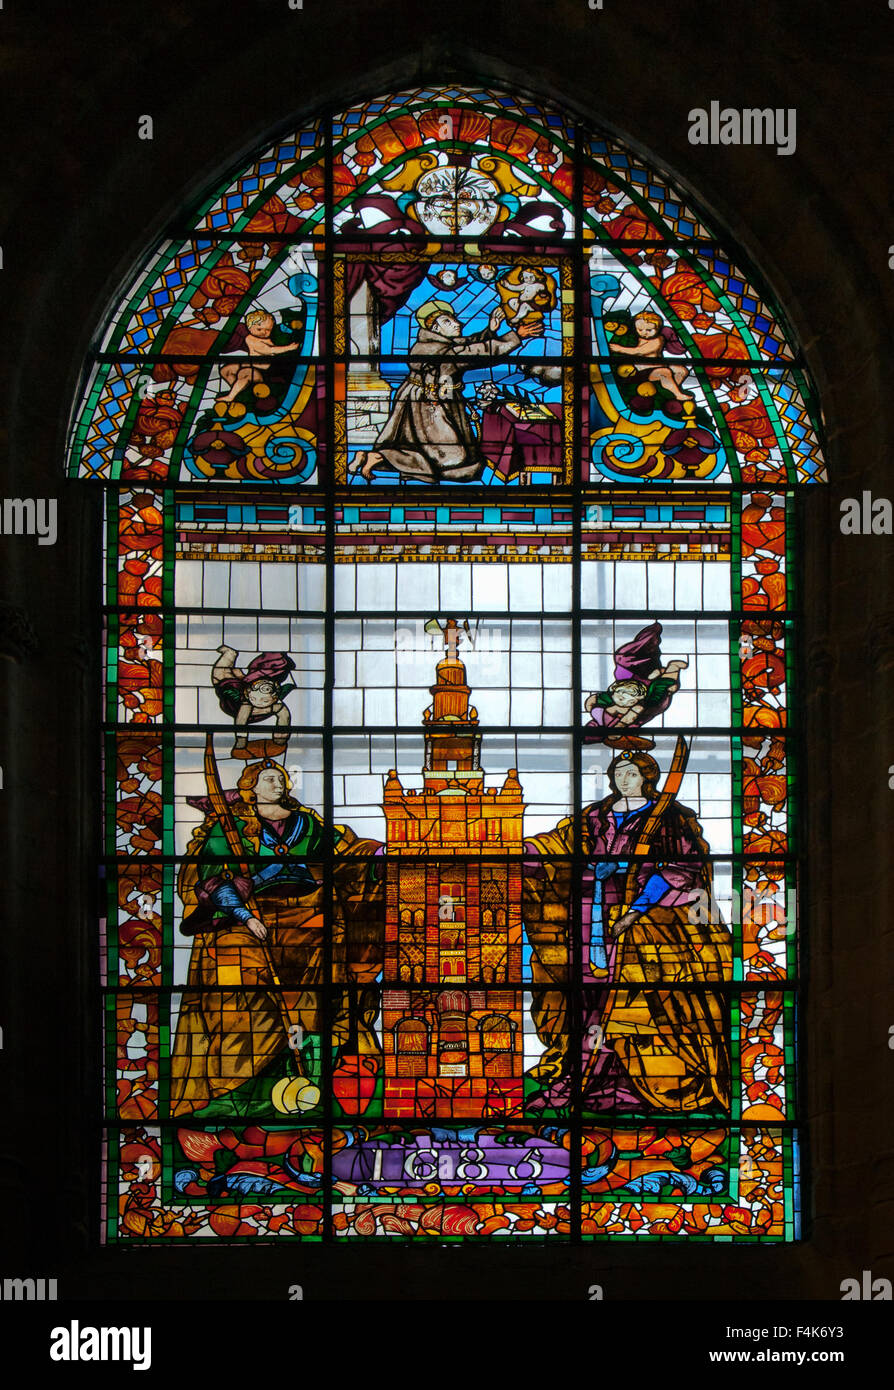 Stained-glass window in Seville cathedral, Spain Stock Photo